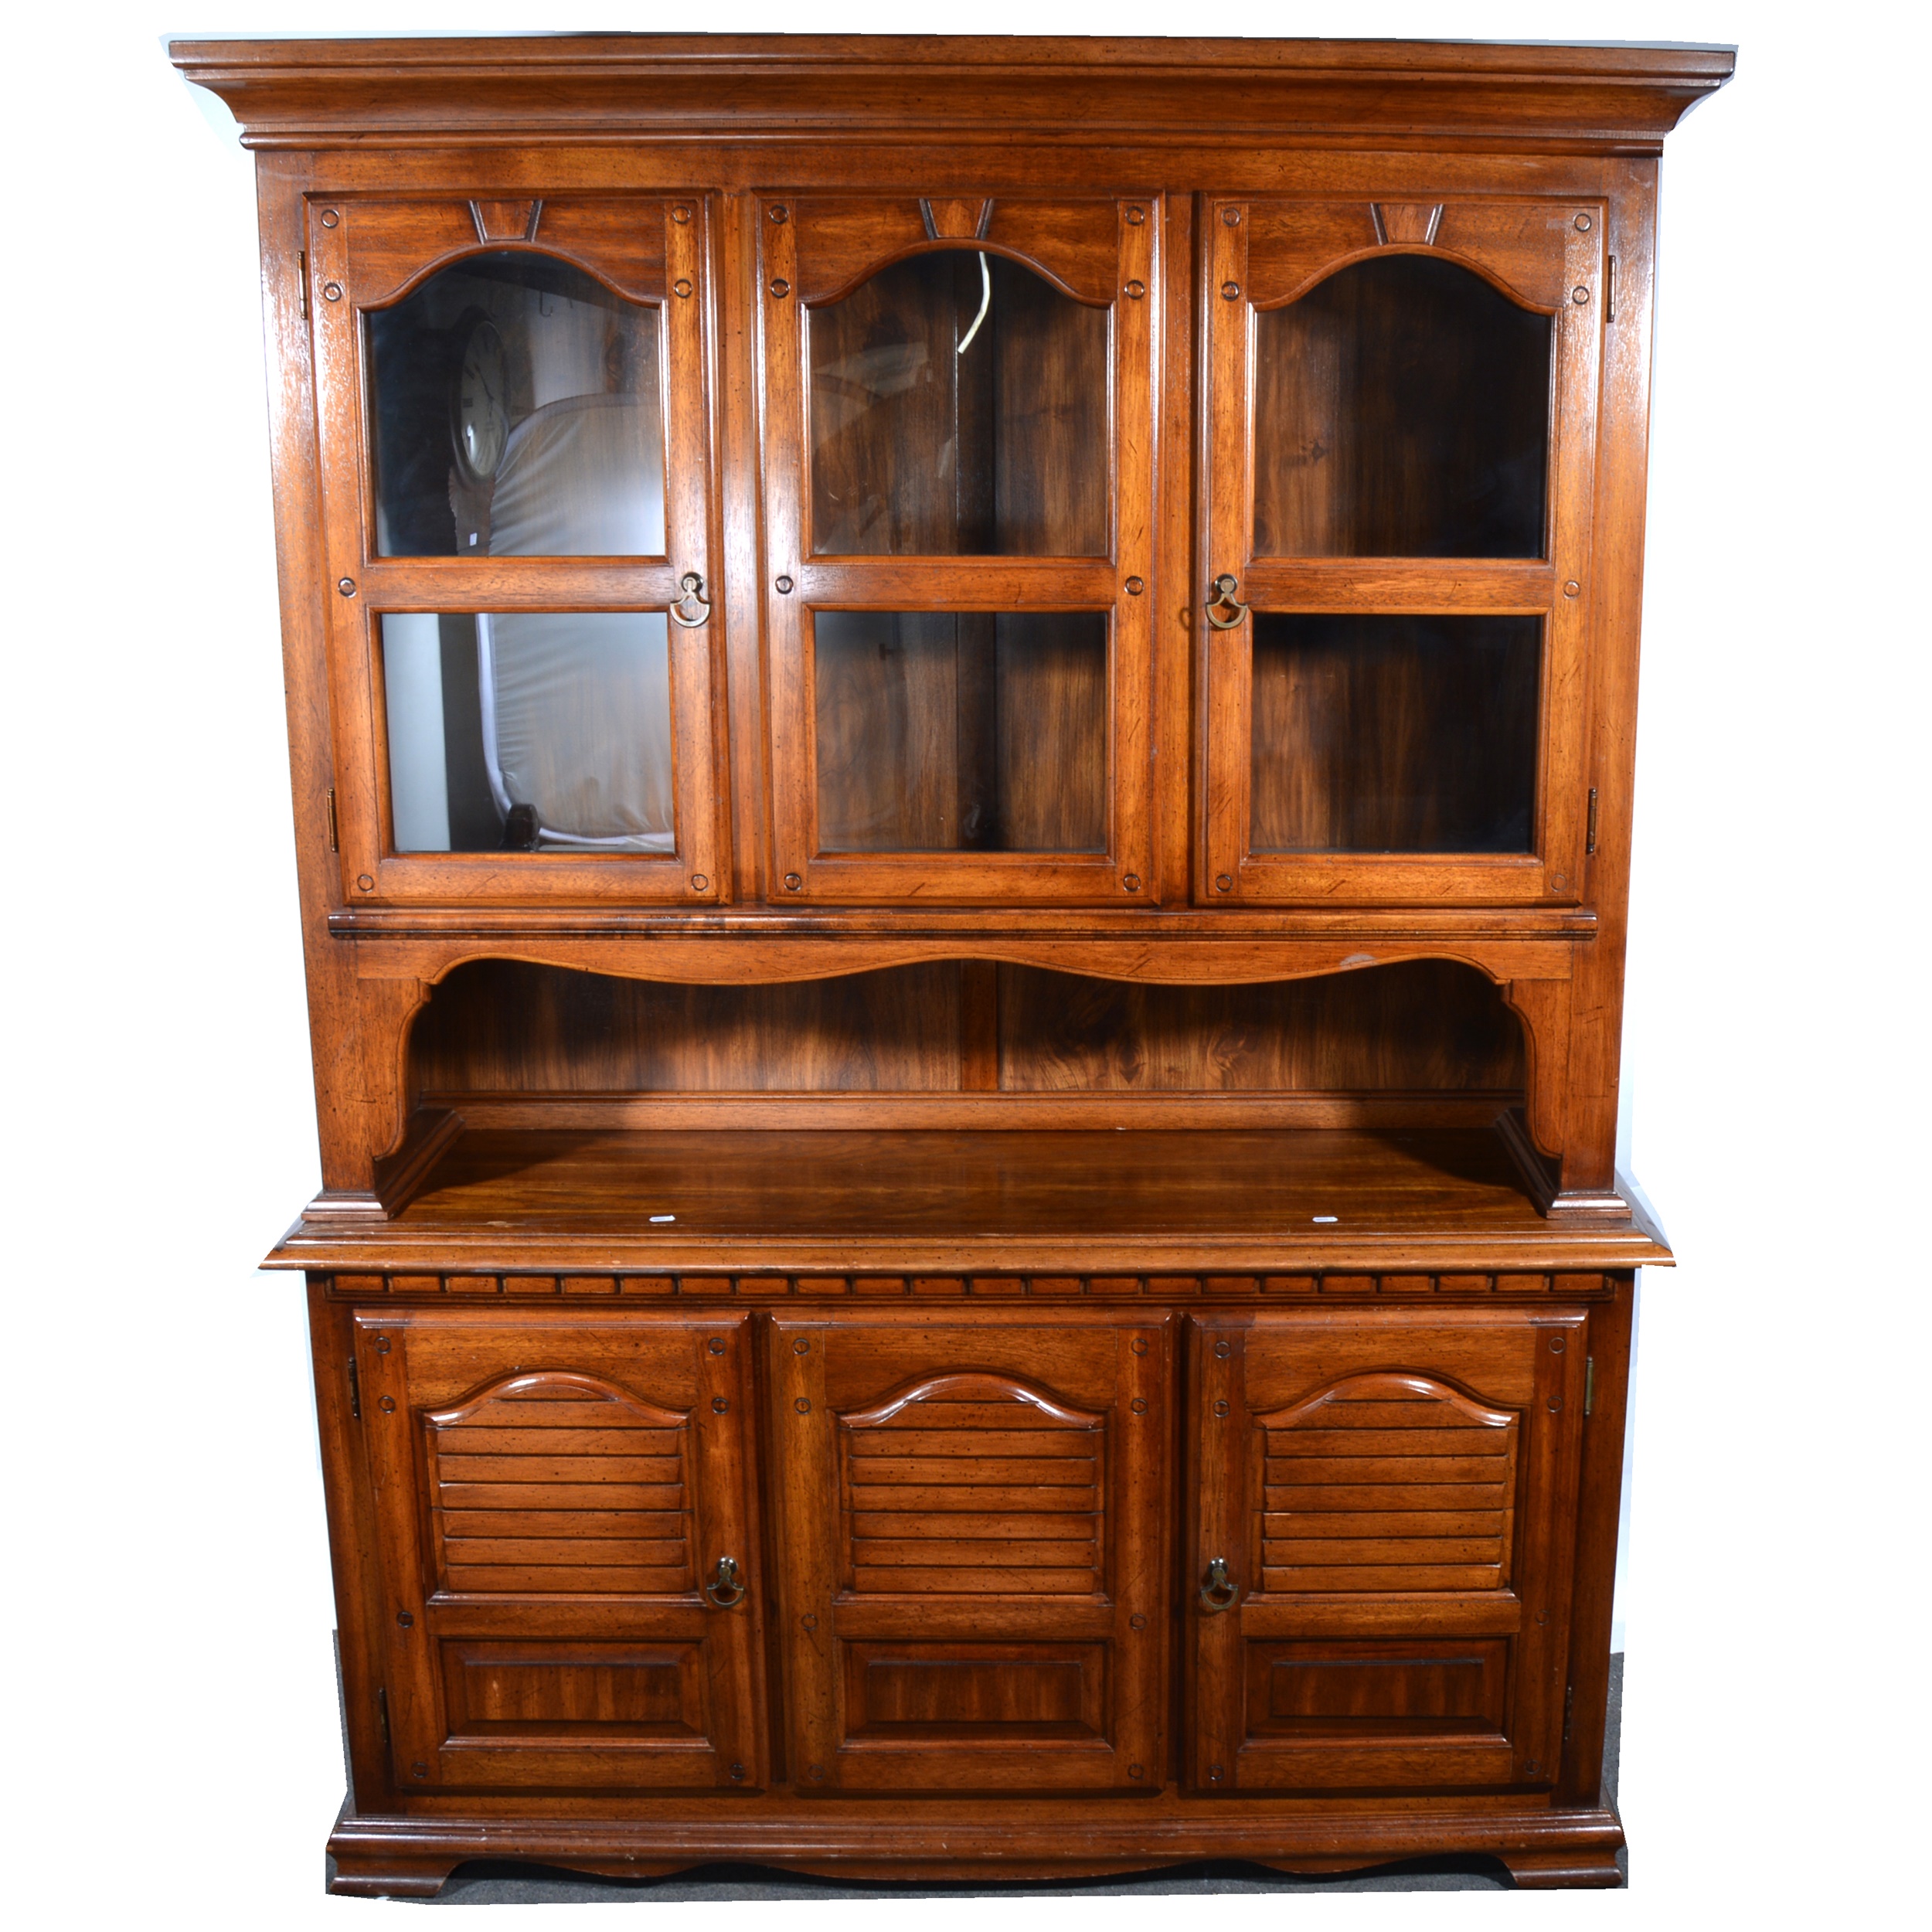 A reproduction Colonial style dresser / sideboard, and set of six Colonial style dining chairs.